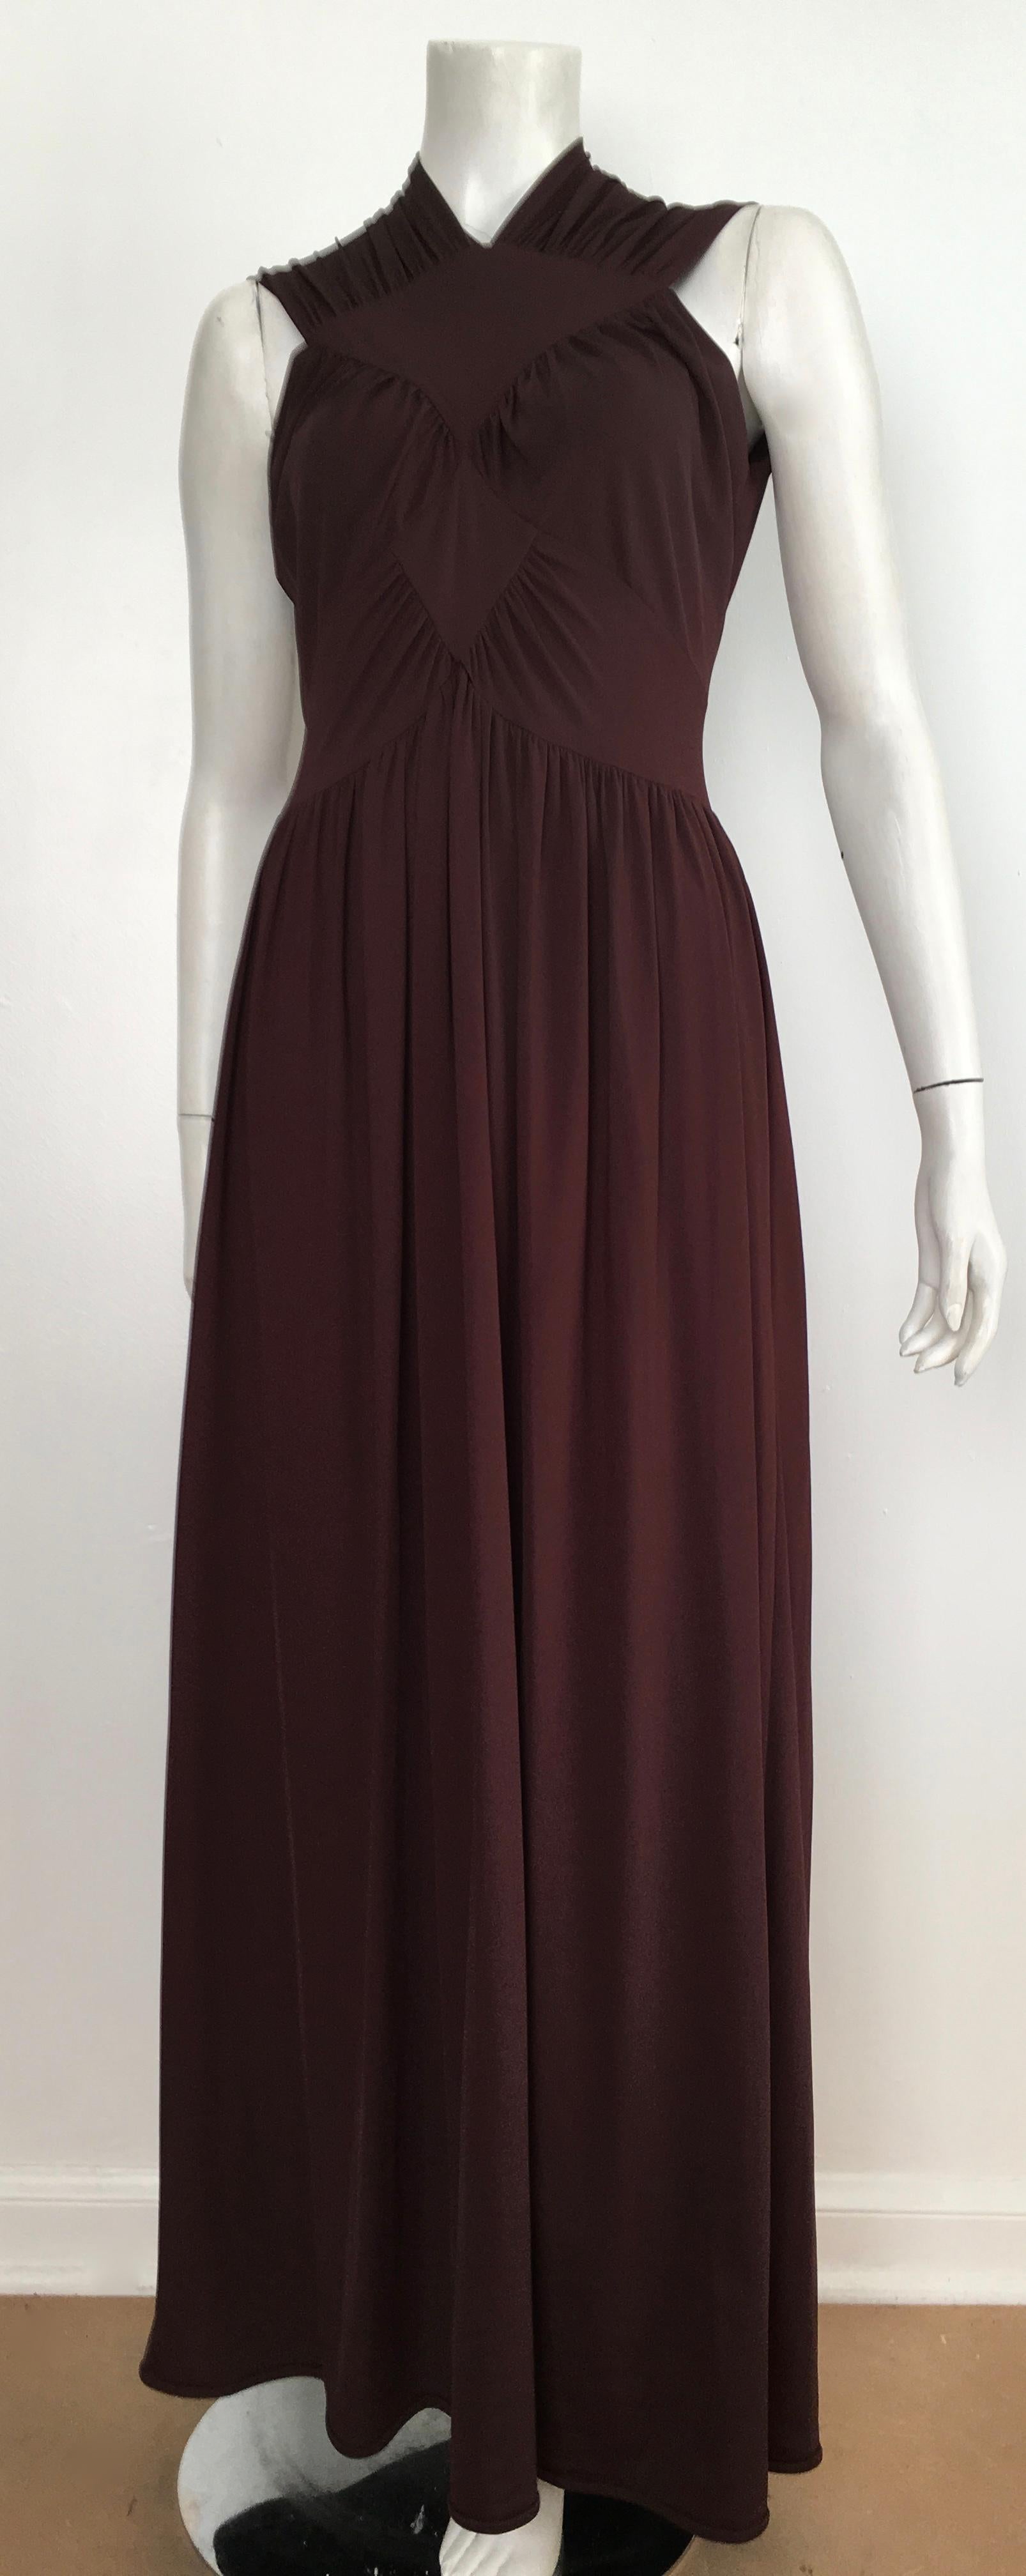 Robert David Morton 1970s Brown Jersey Maxi Dress with pockets Size 8. For Sale 8